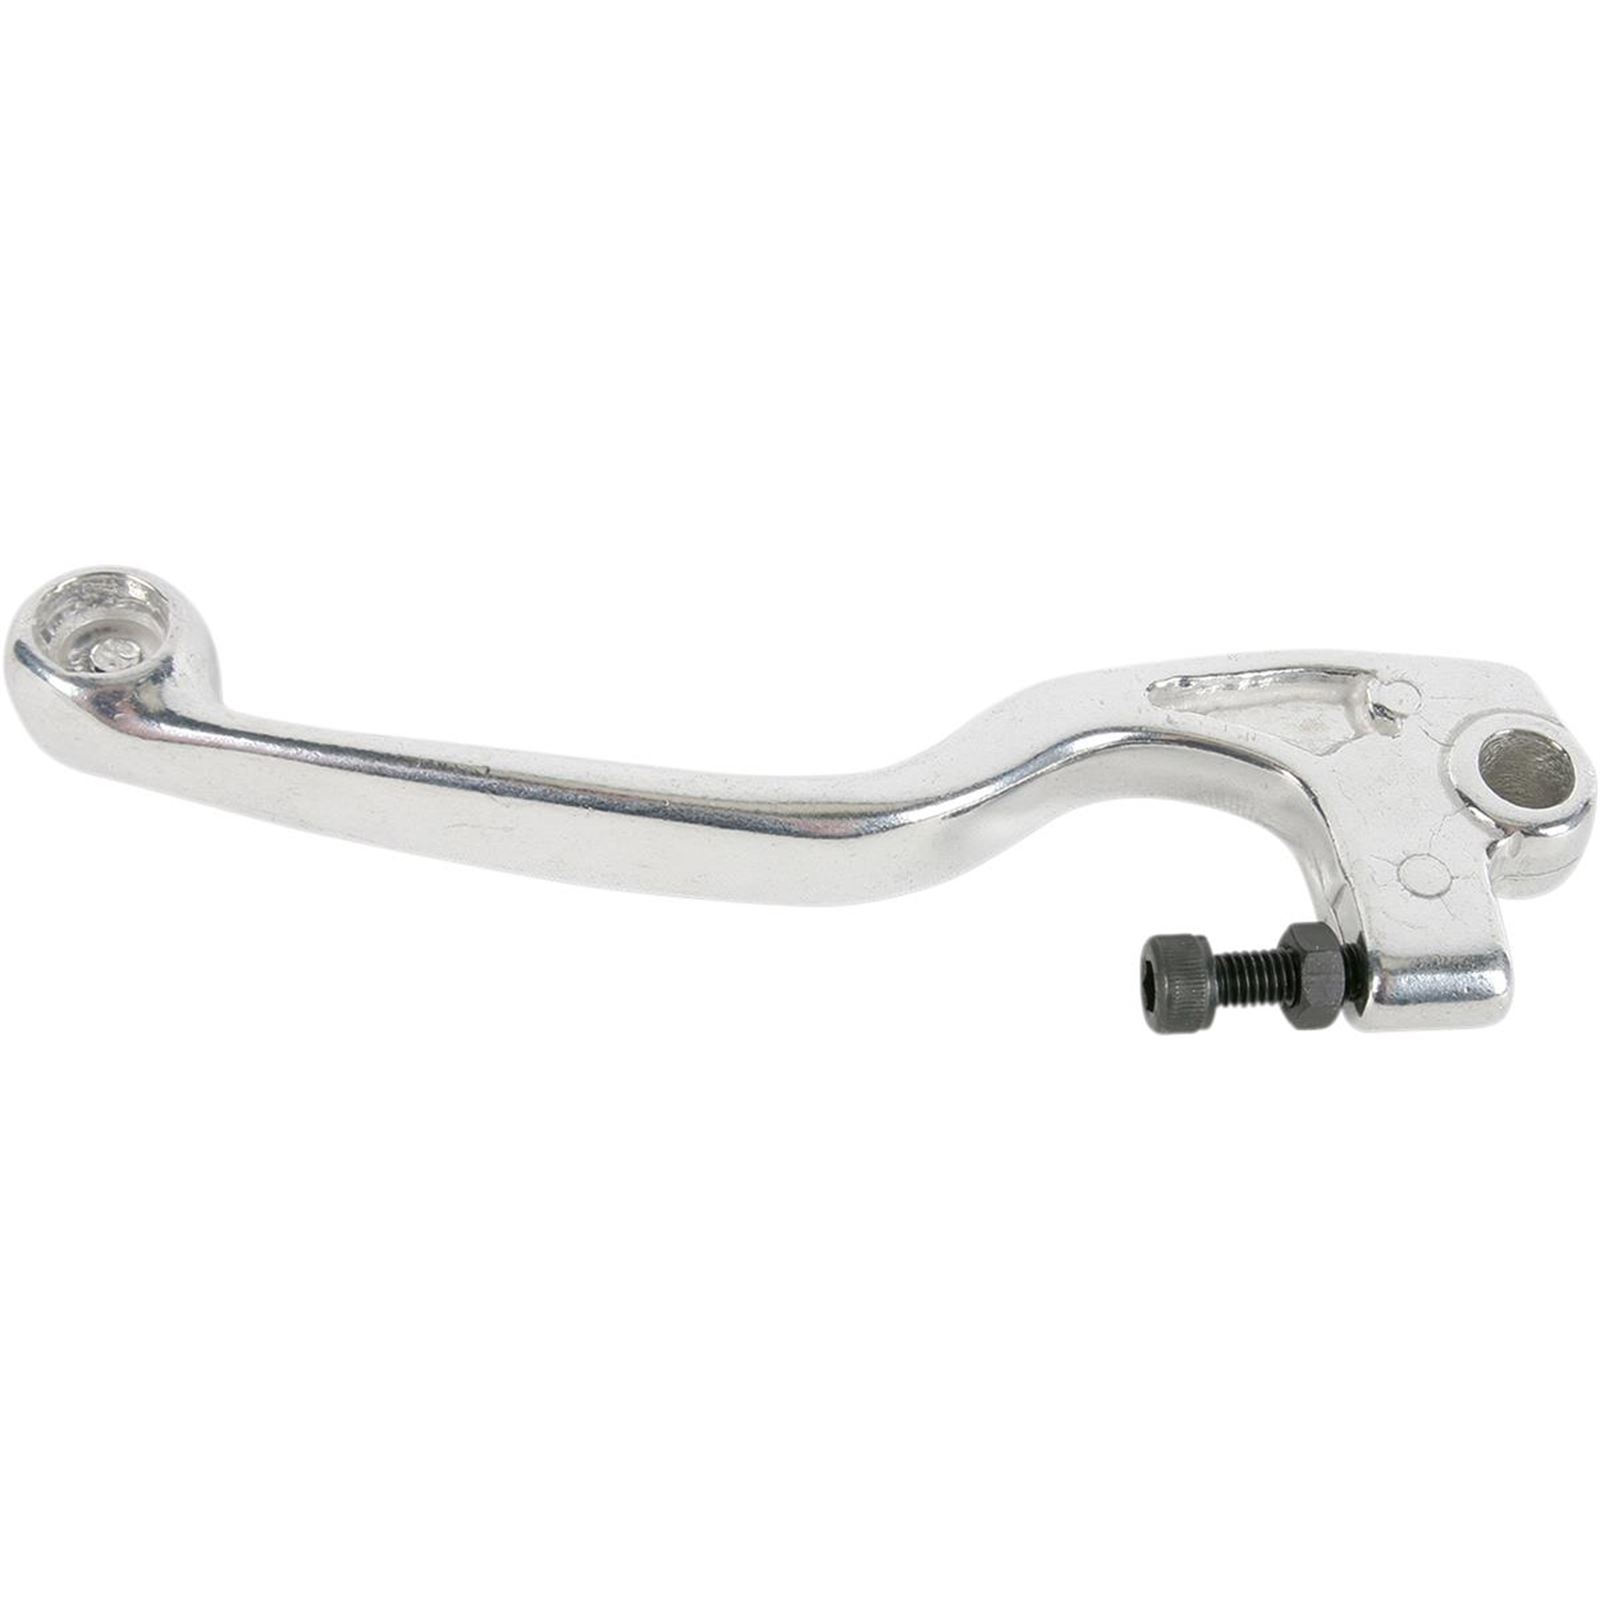 Parts Unlimited Right-Hand Lever For Kawasaki